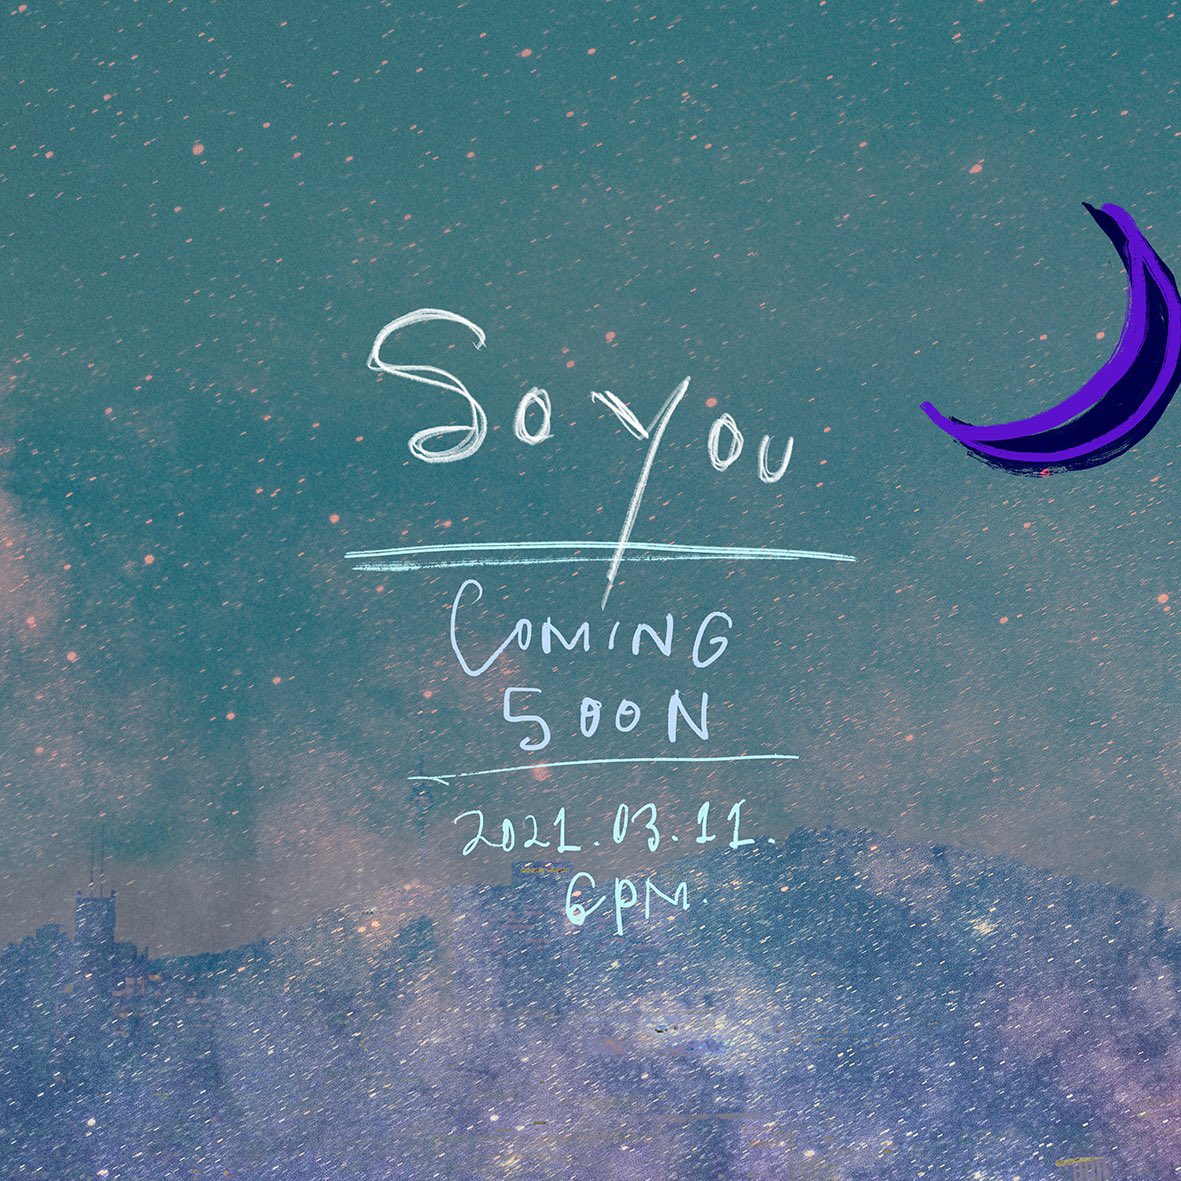 soyou-announces-comeback-on-march-11-with-new-song-written-by-babylon-lee-hyori